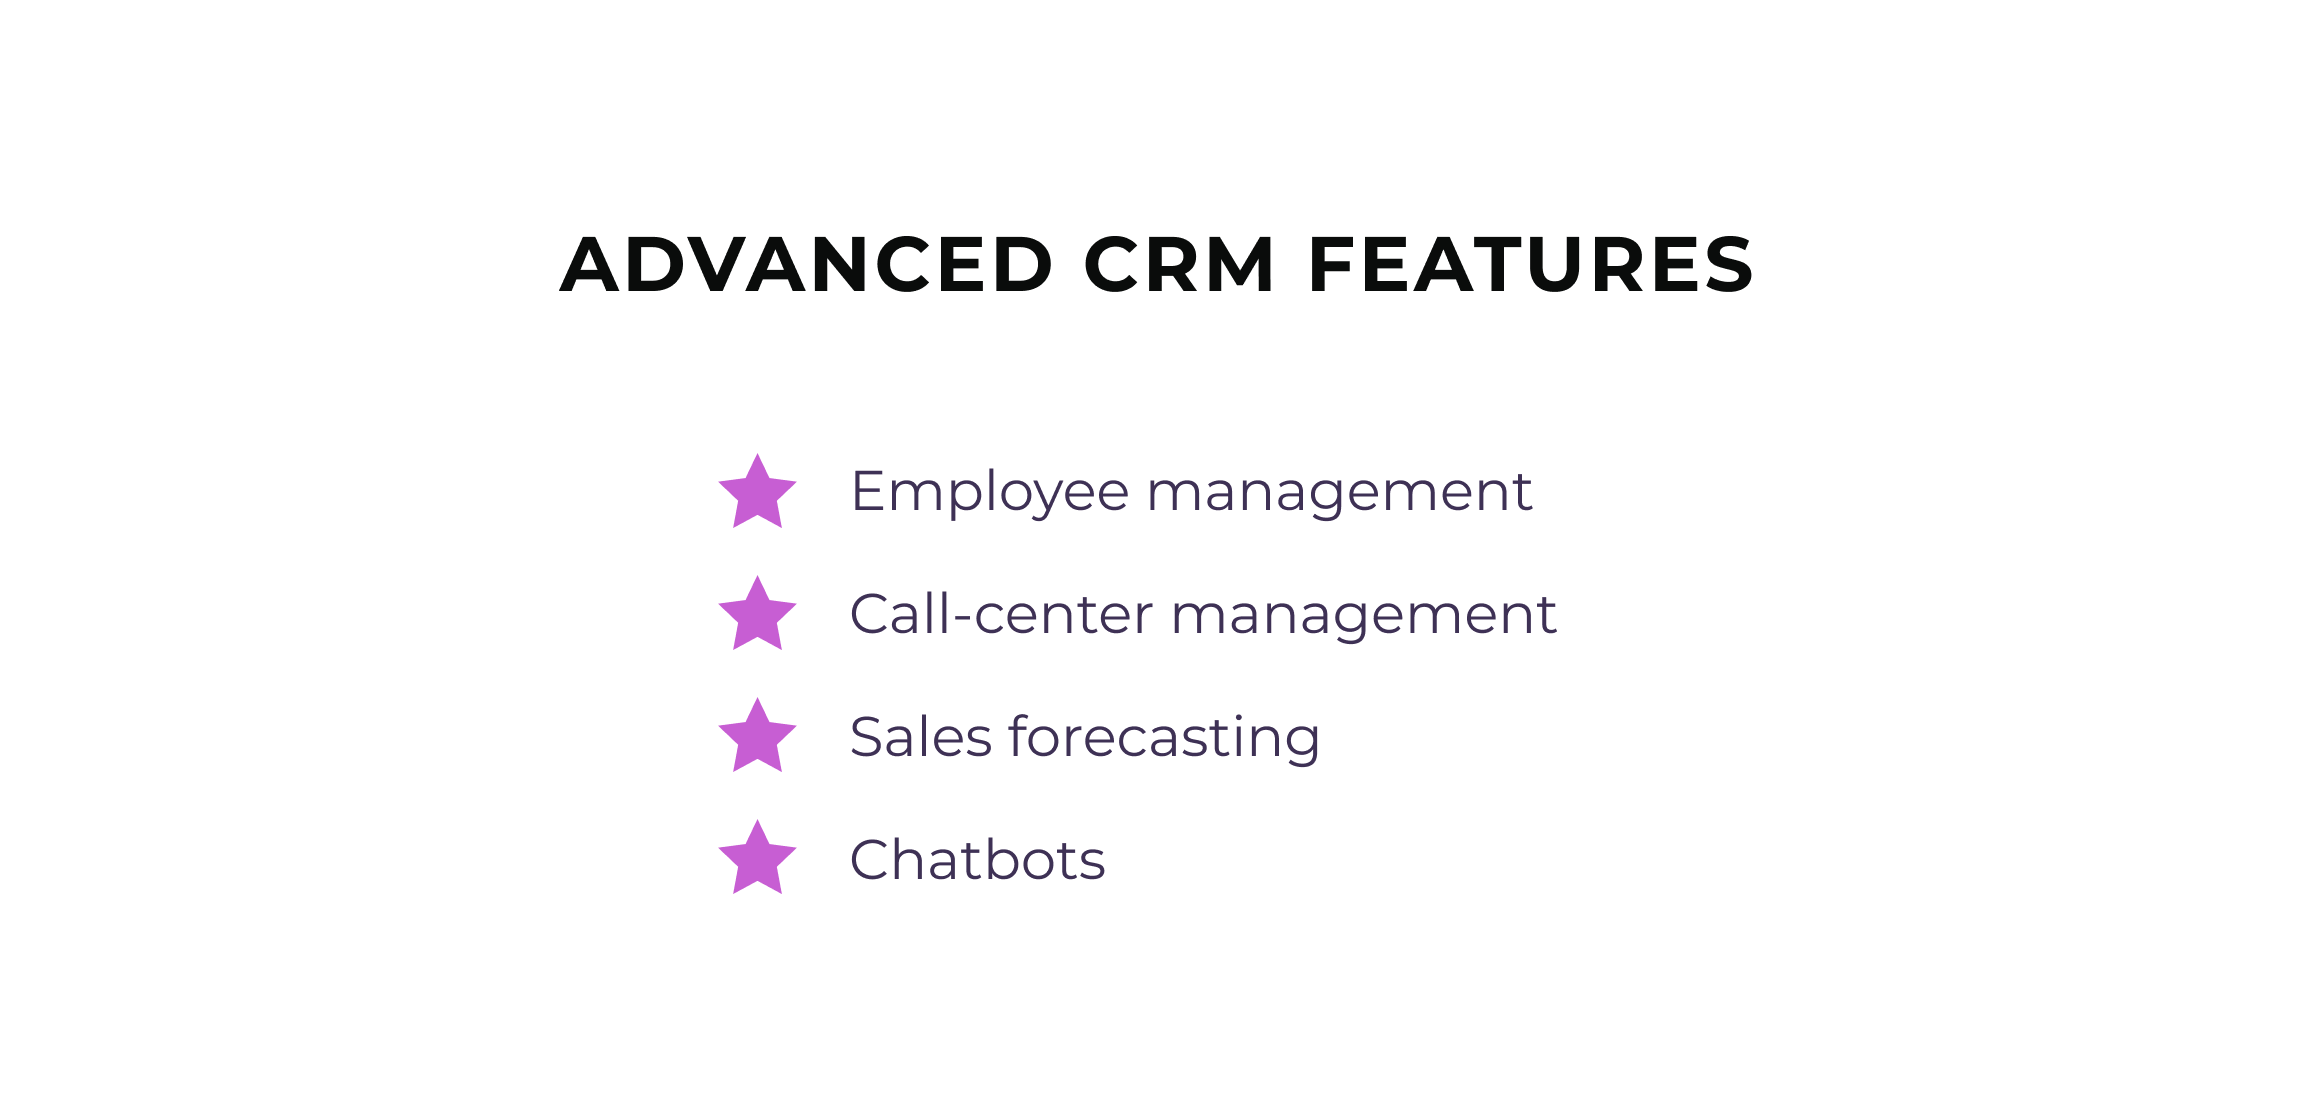 Advanced CRM features